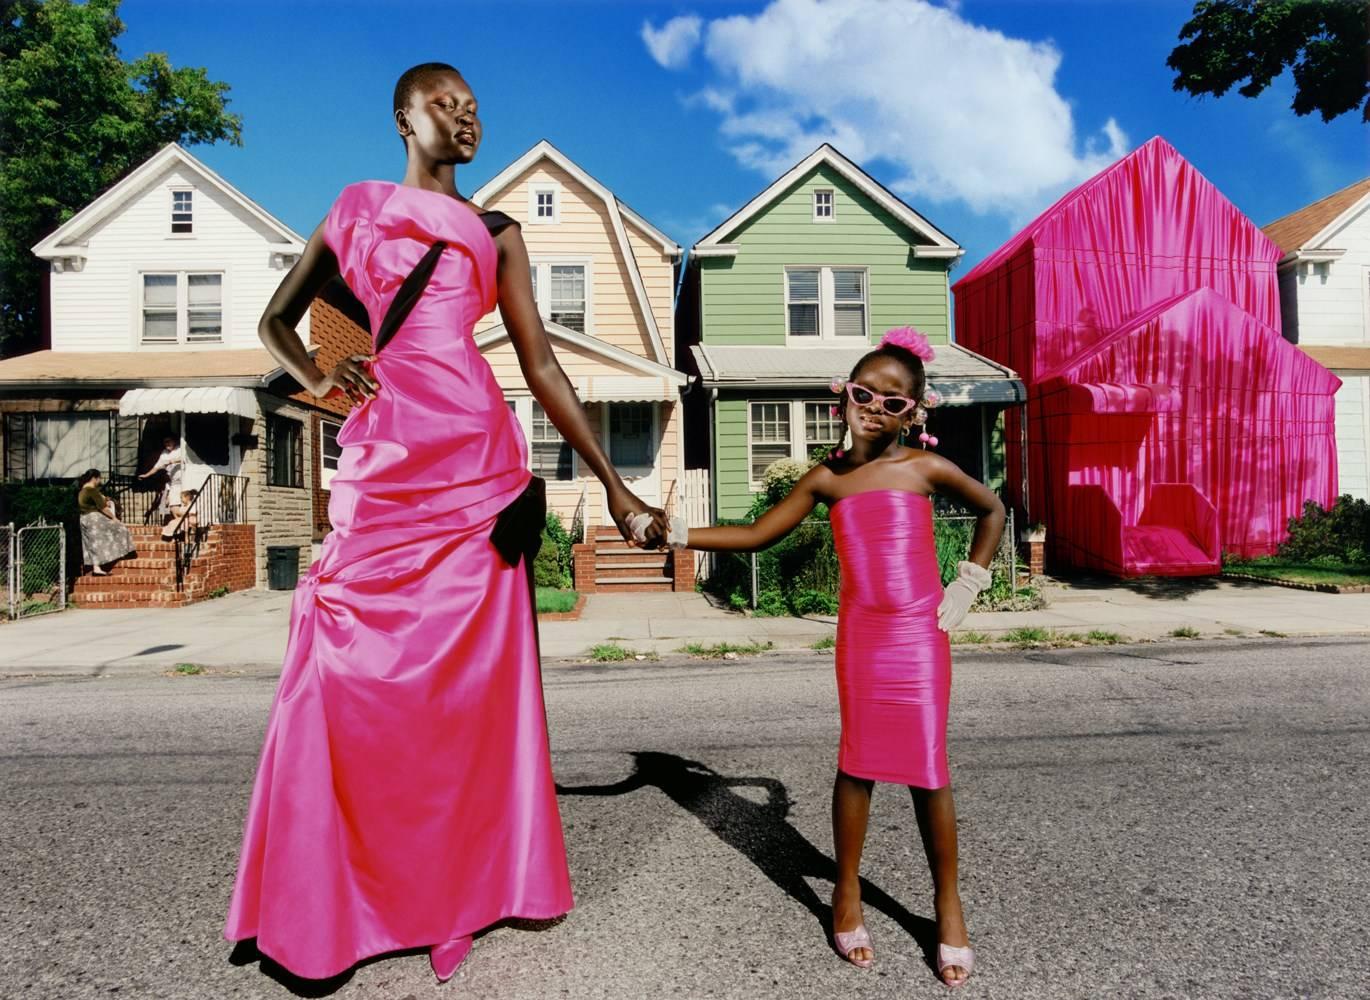 Alek Wek: This is My House - Photograph by David LaChapelle